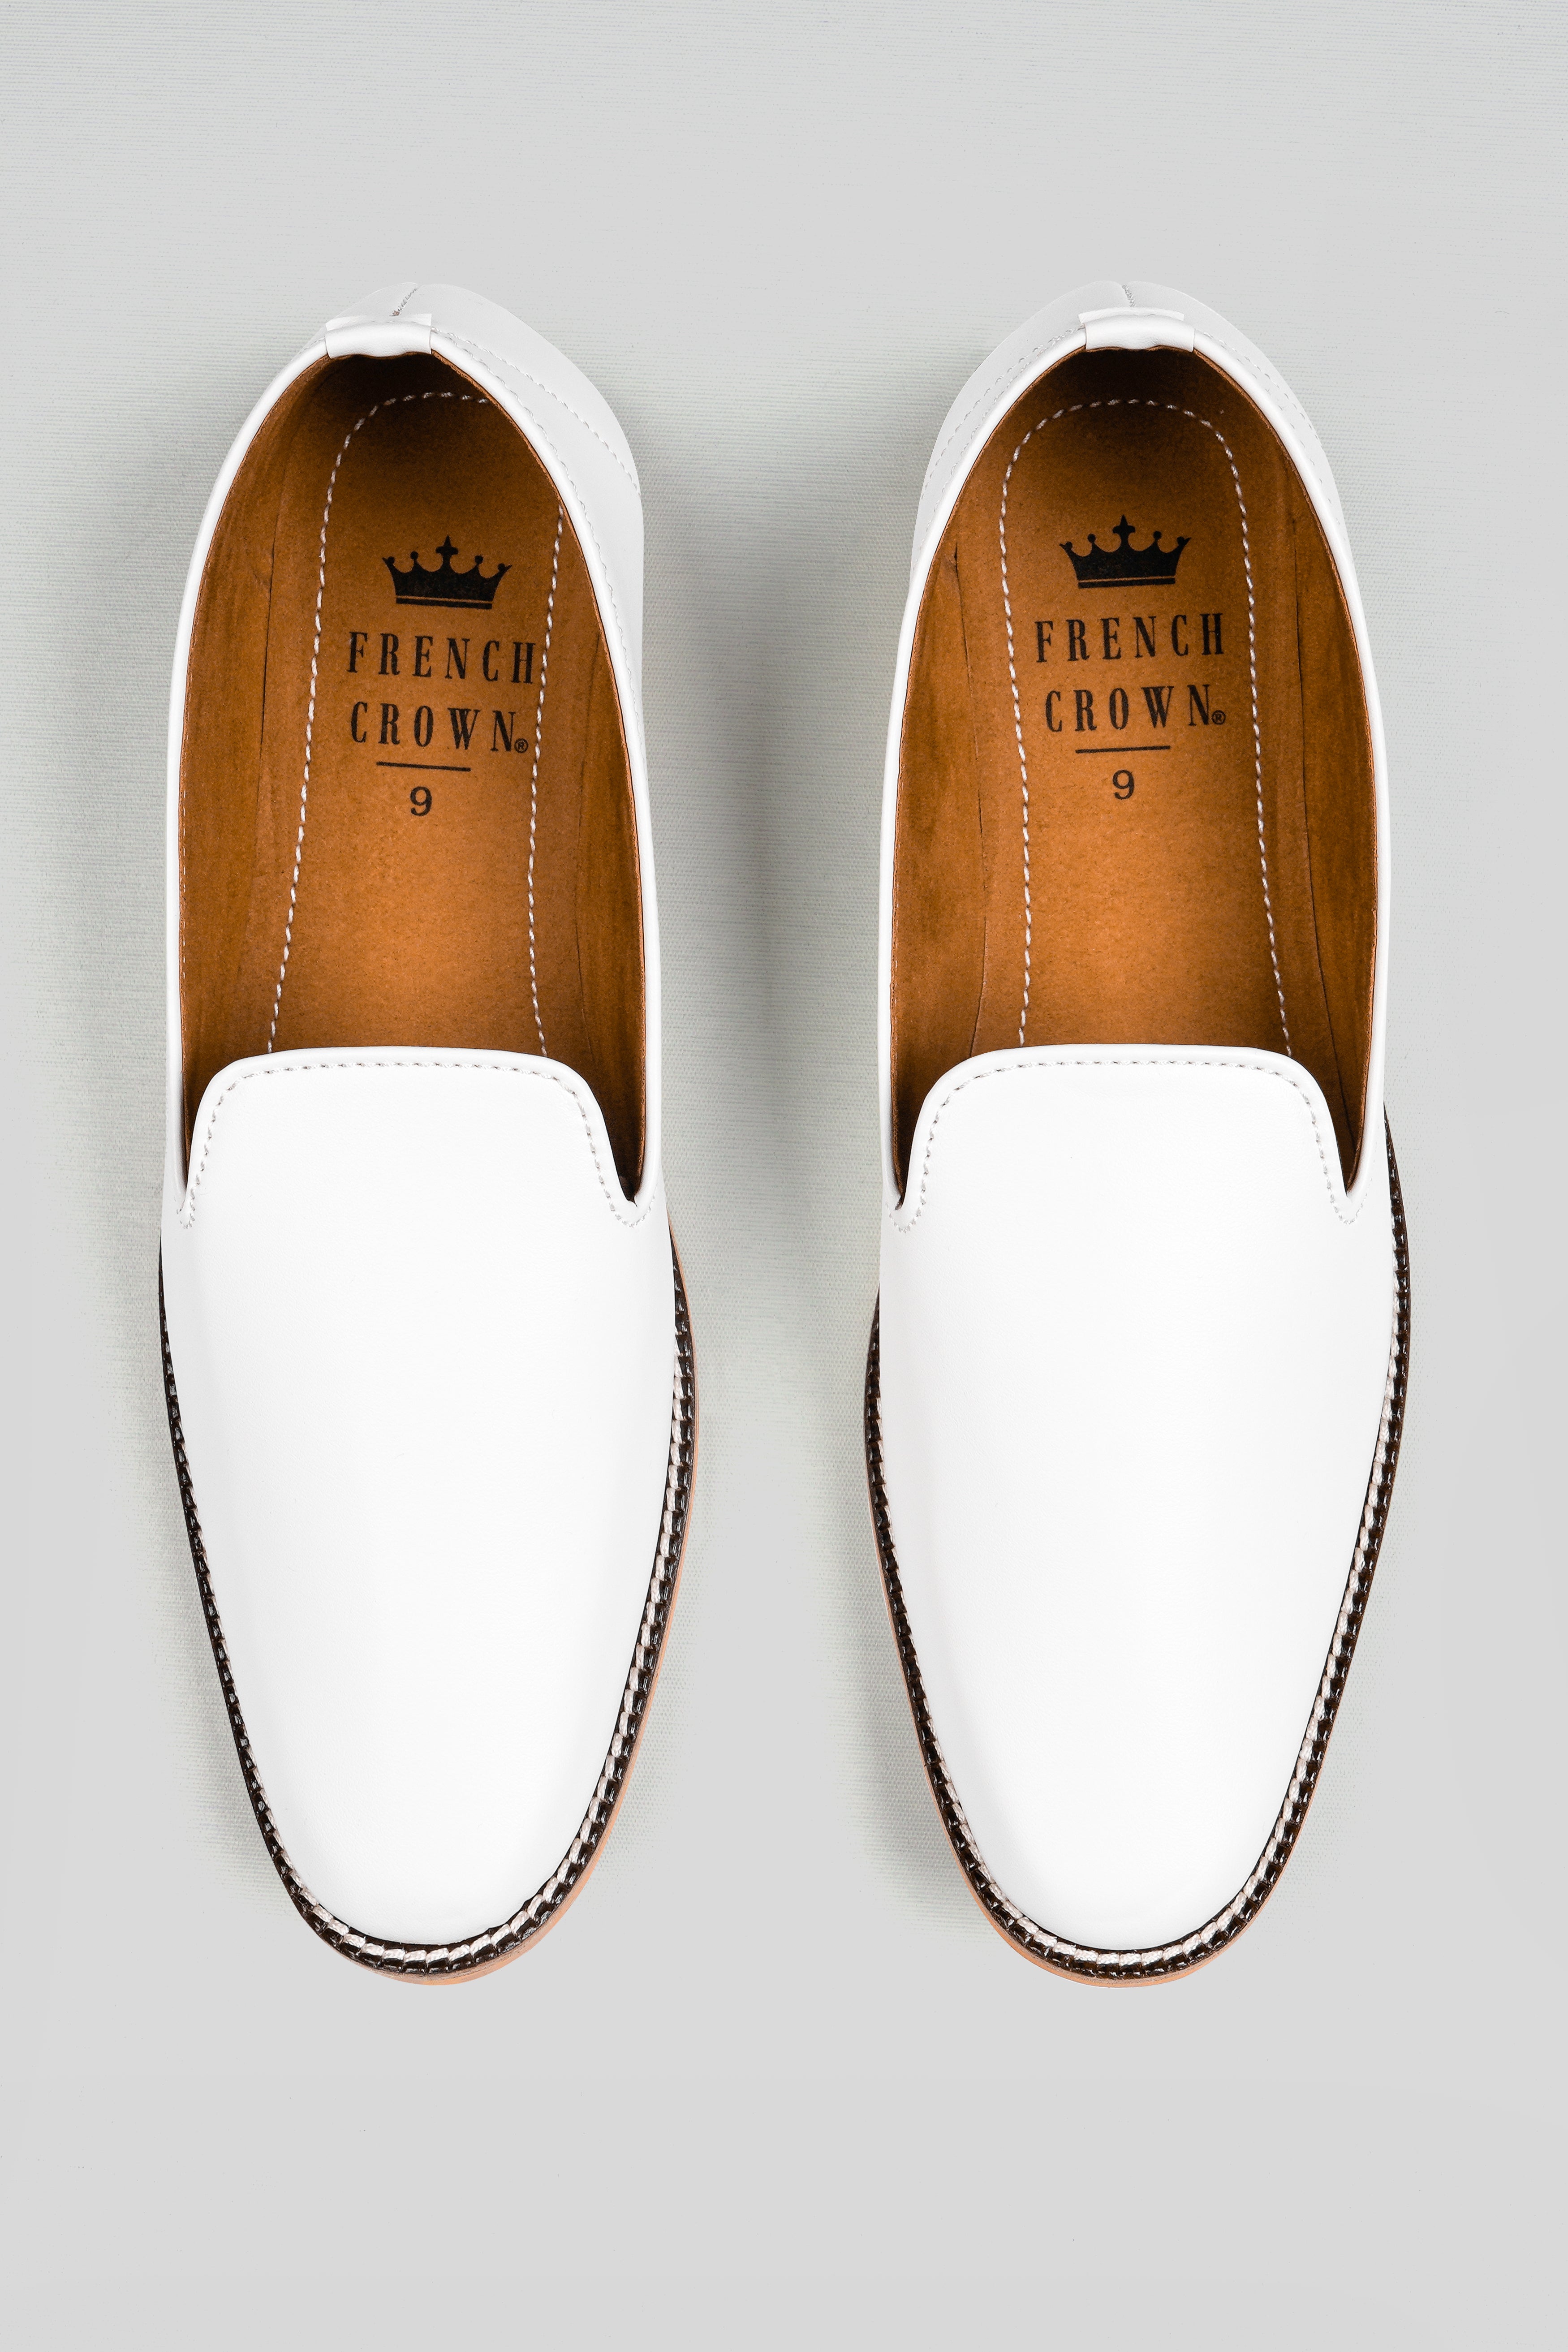 Bright White Vegan Leather Hand Stitched Mojri Slip-On Shoes FT144-6, FT144-7, FT144-8, FT144-9, FT144-10, FT144-11